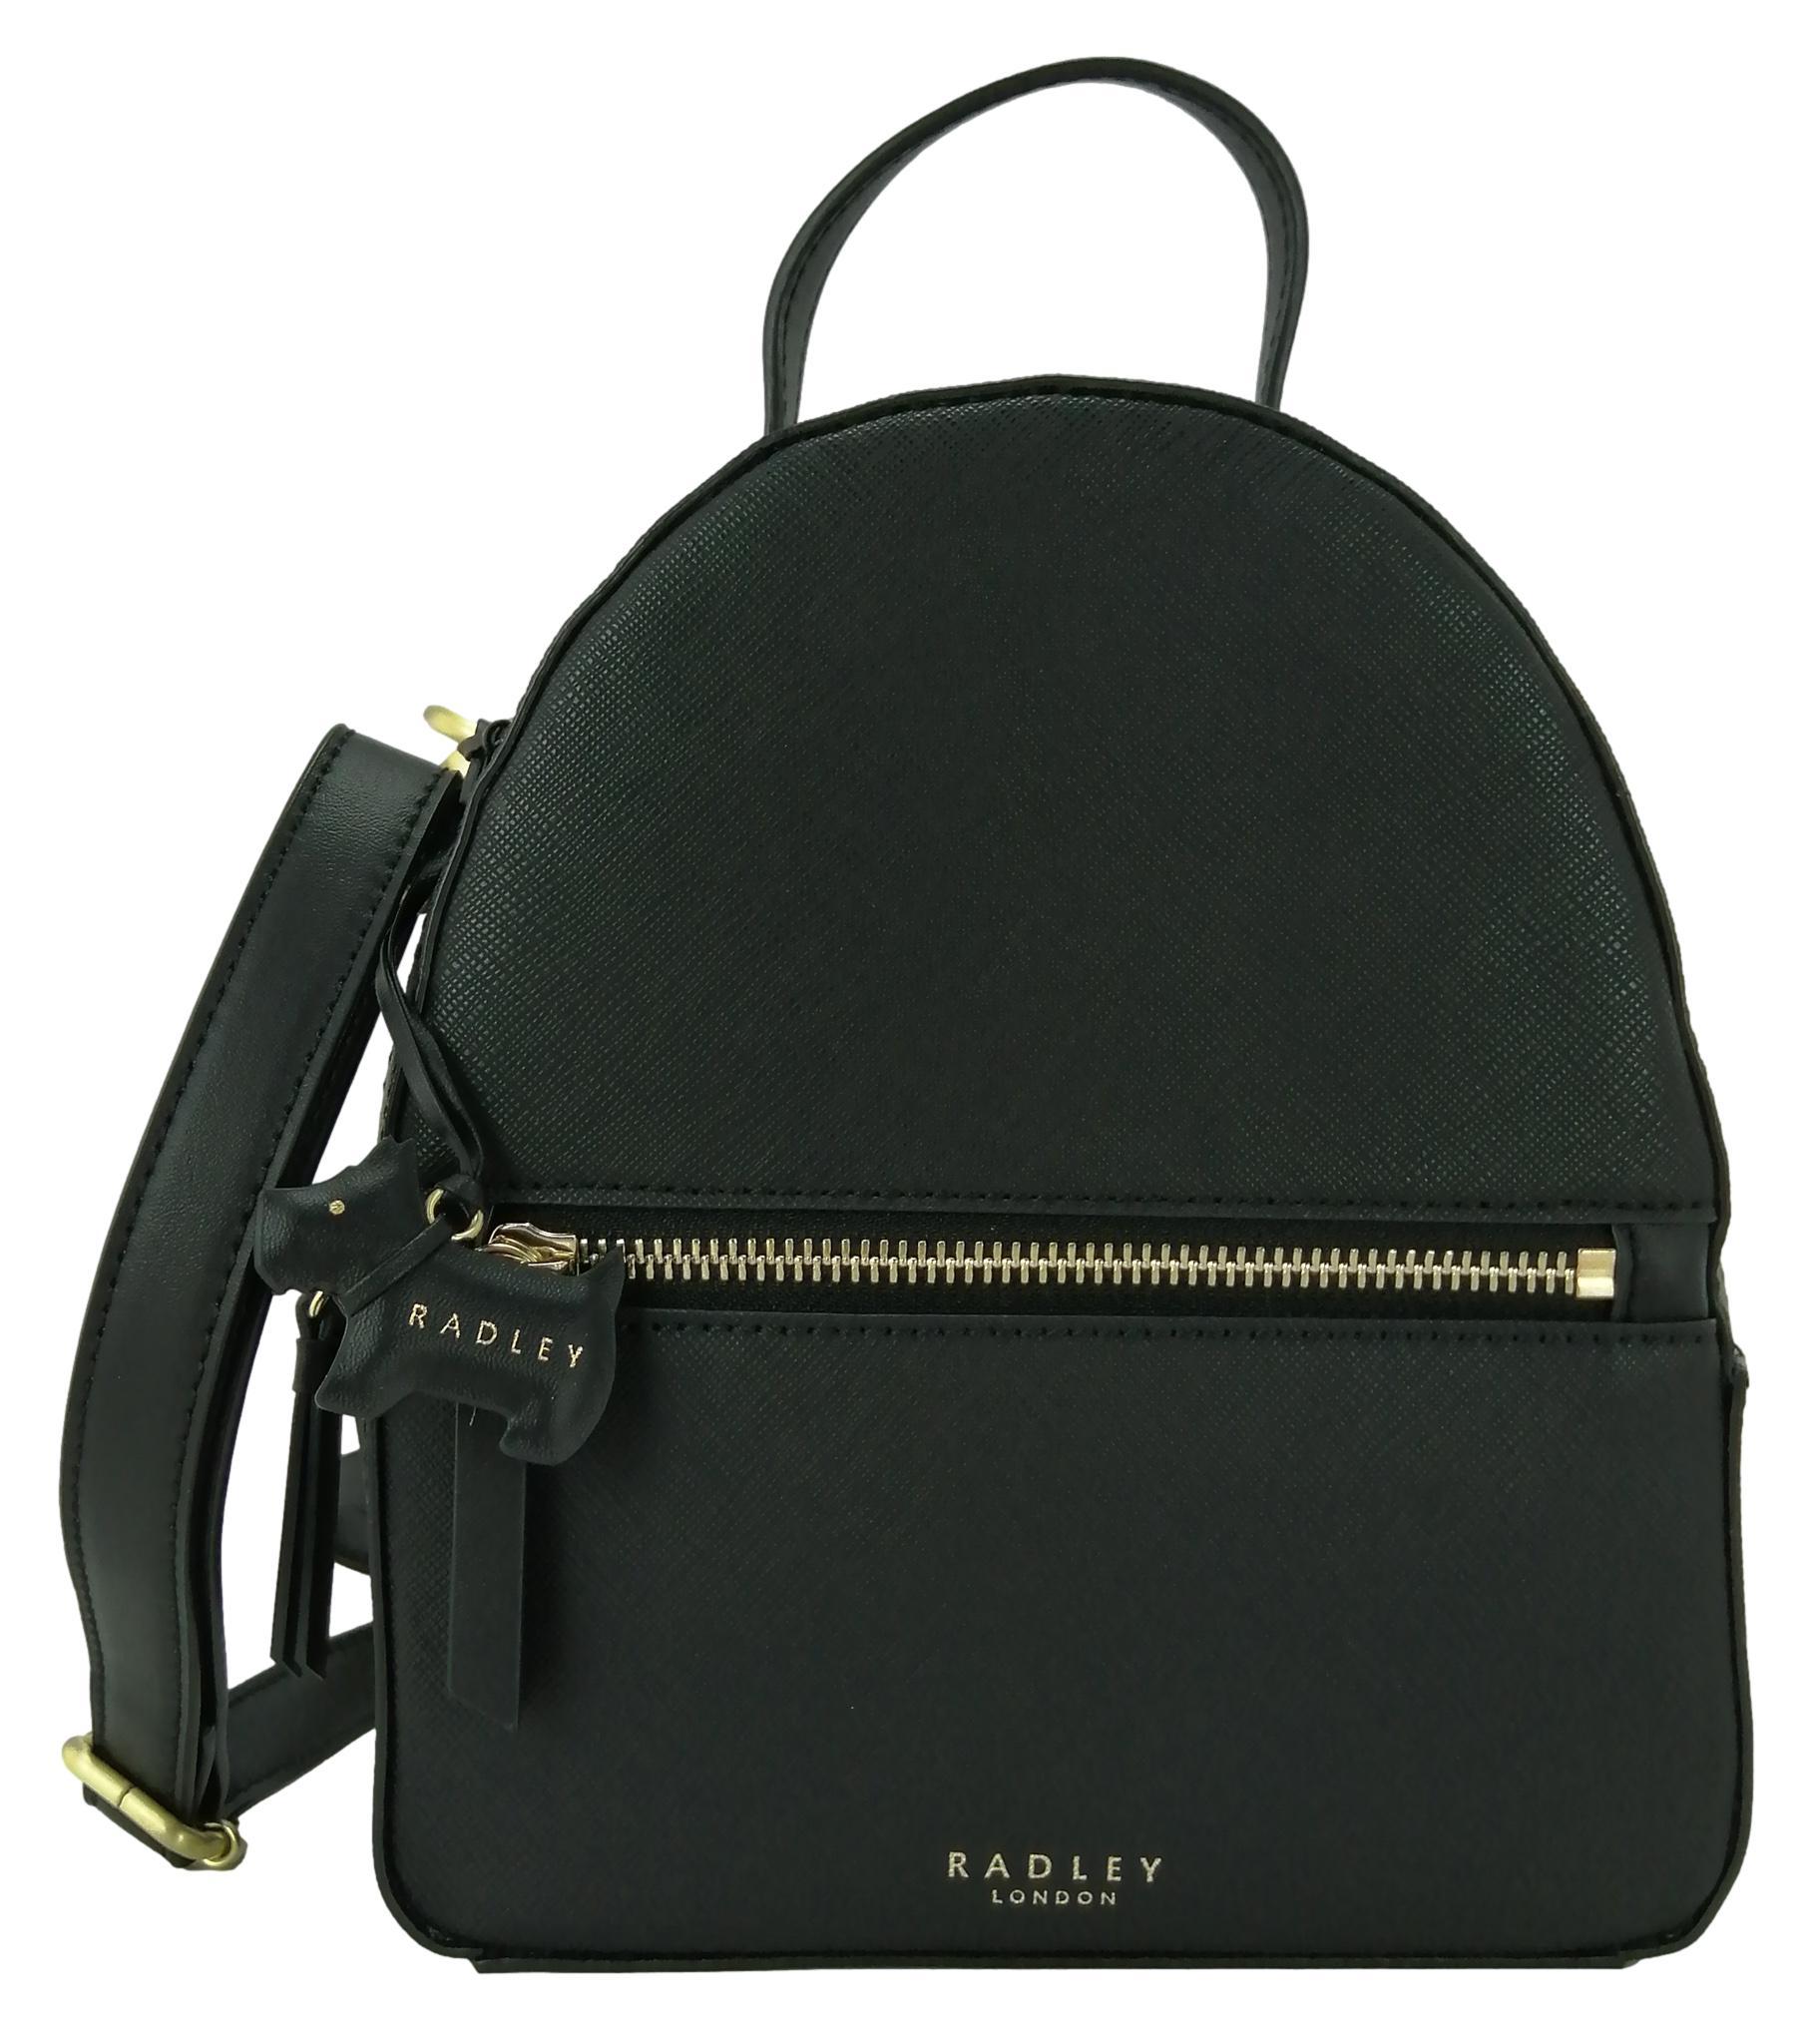 Radley Backpack Black Small PU Synthetic Leather Essex Road